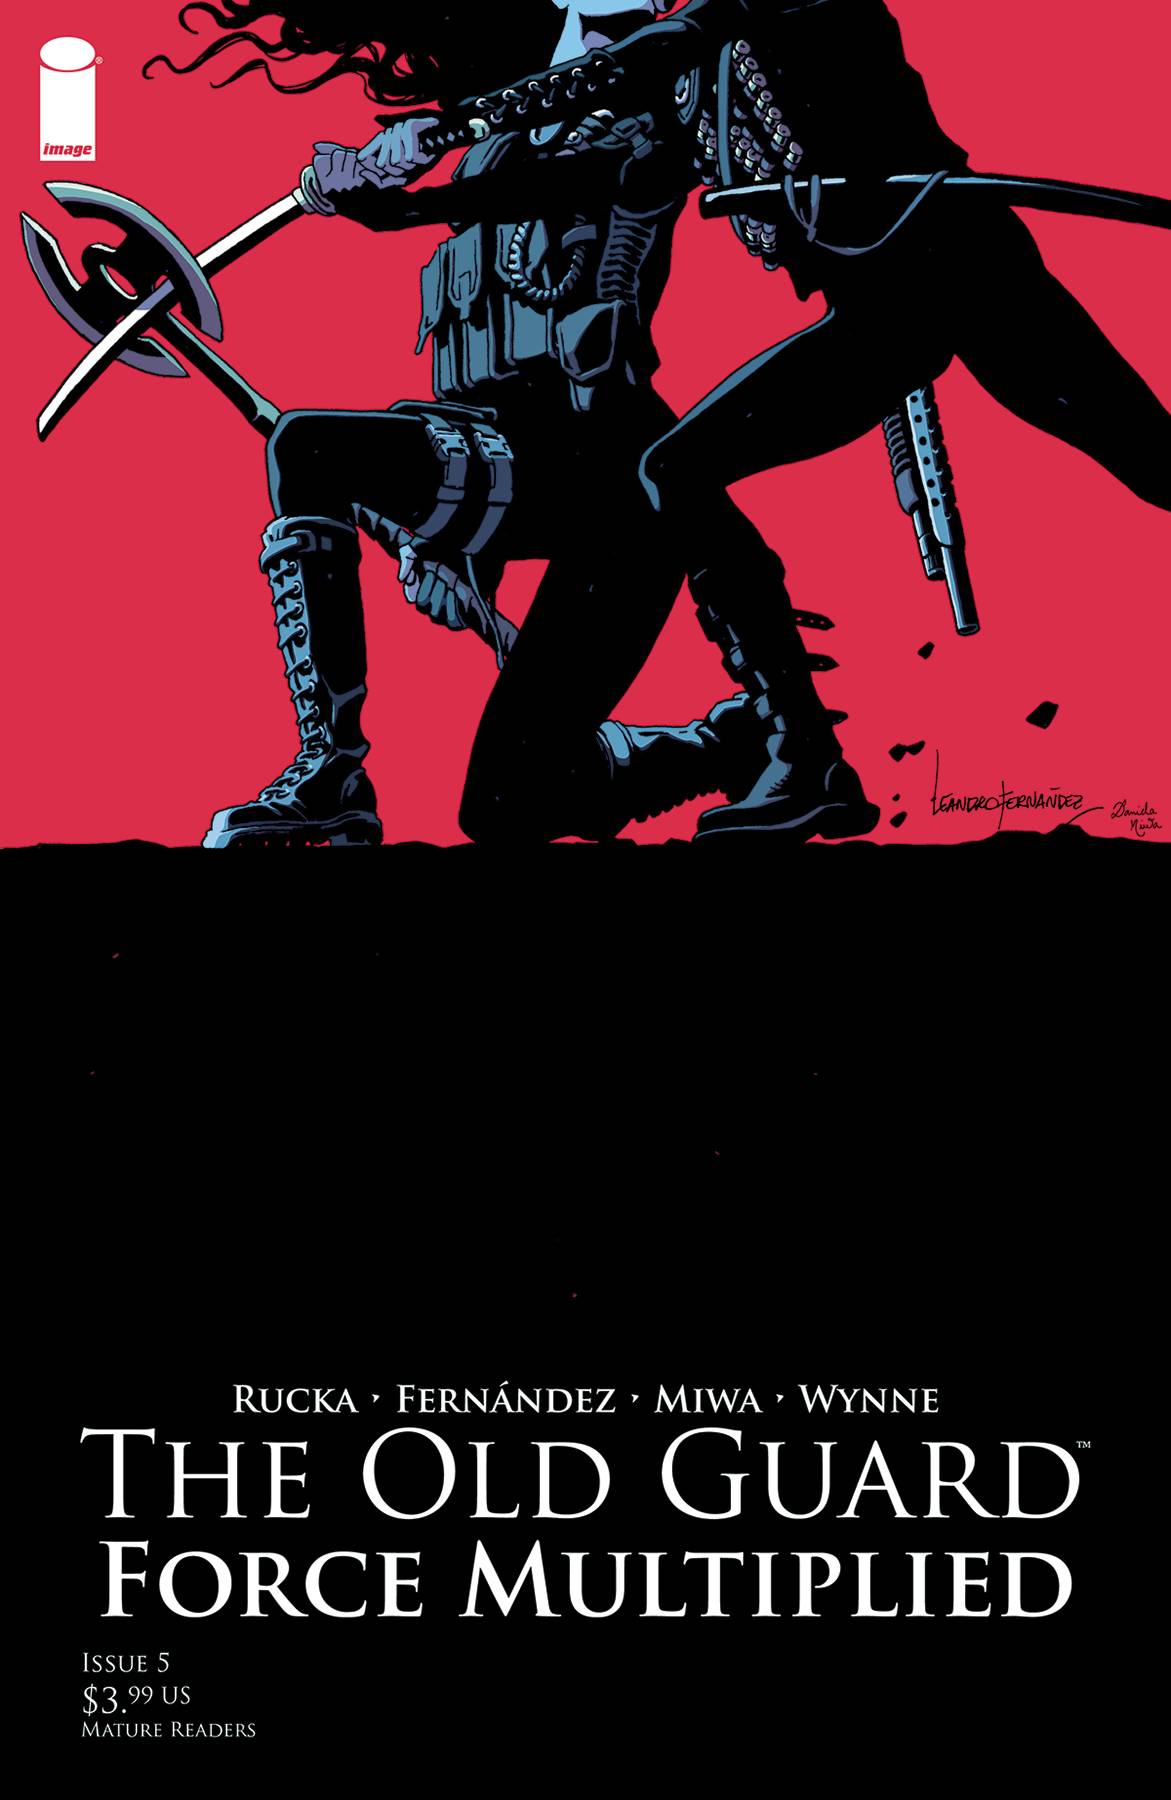 The Old Guard: Force Multiplied #5 (2020)